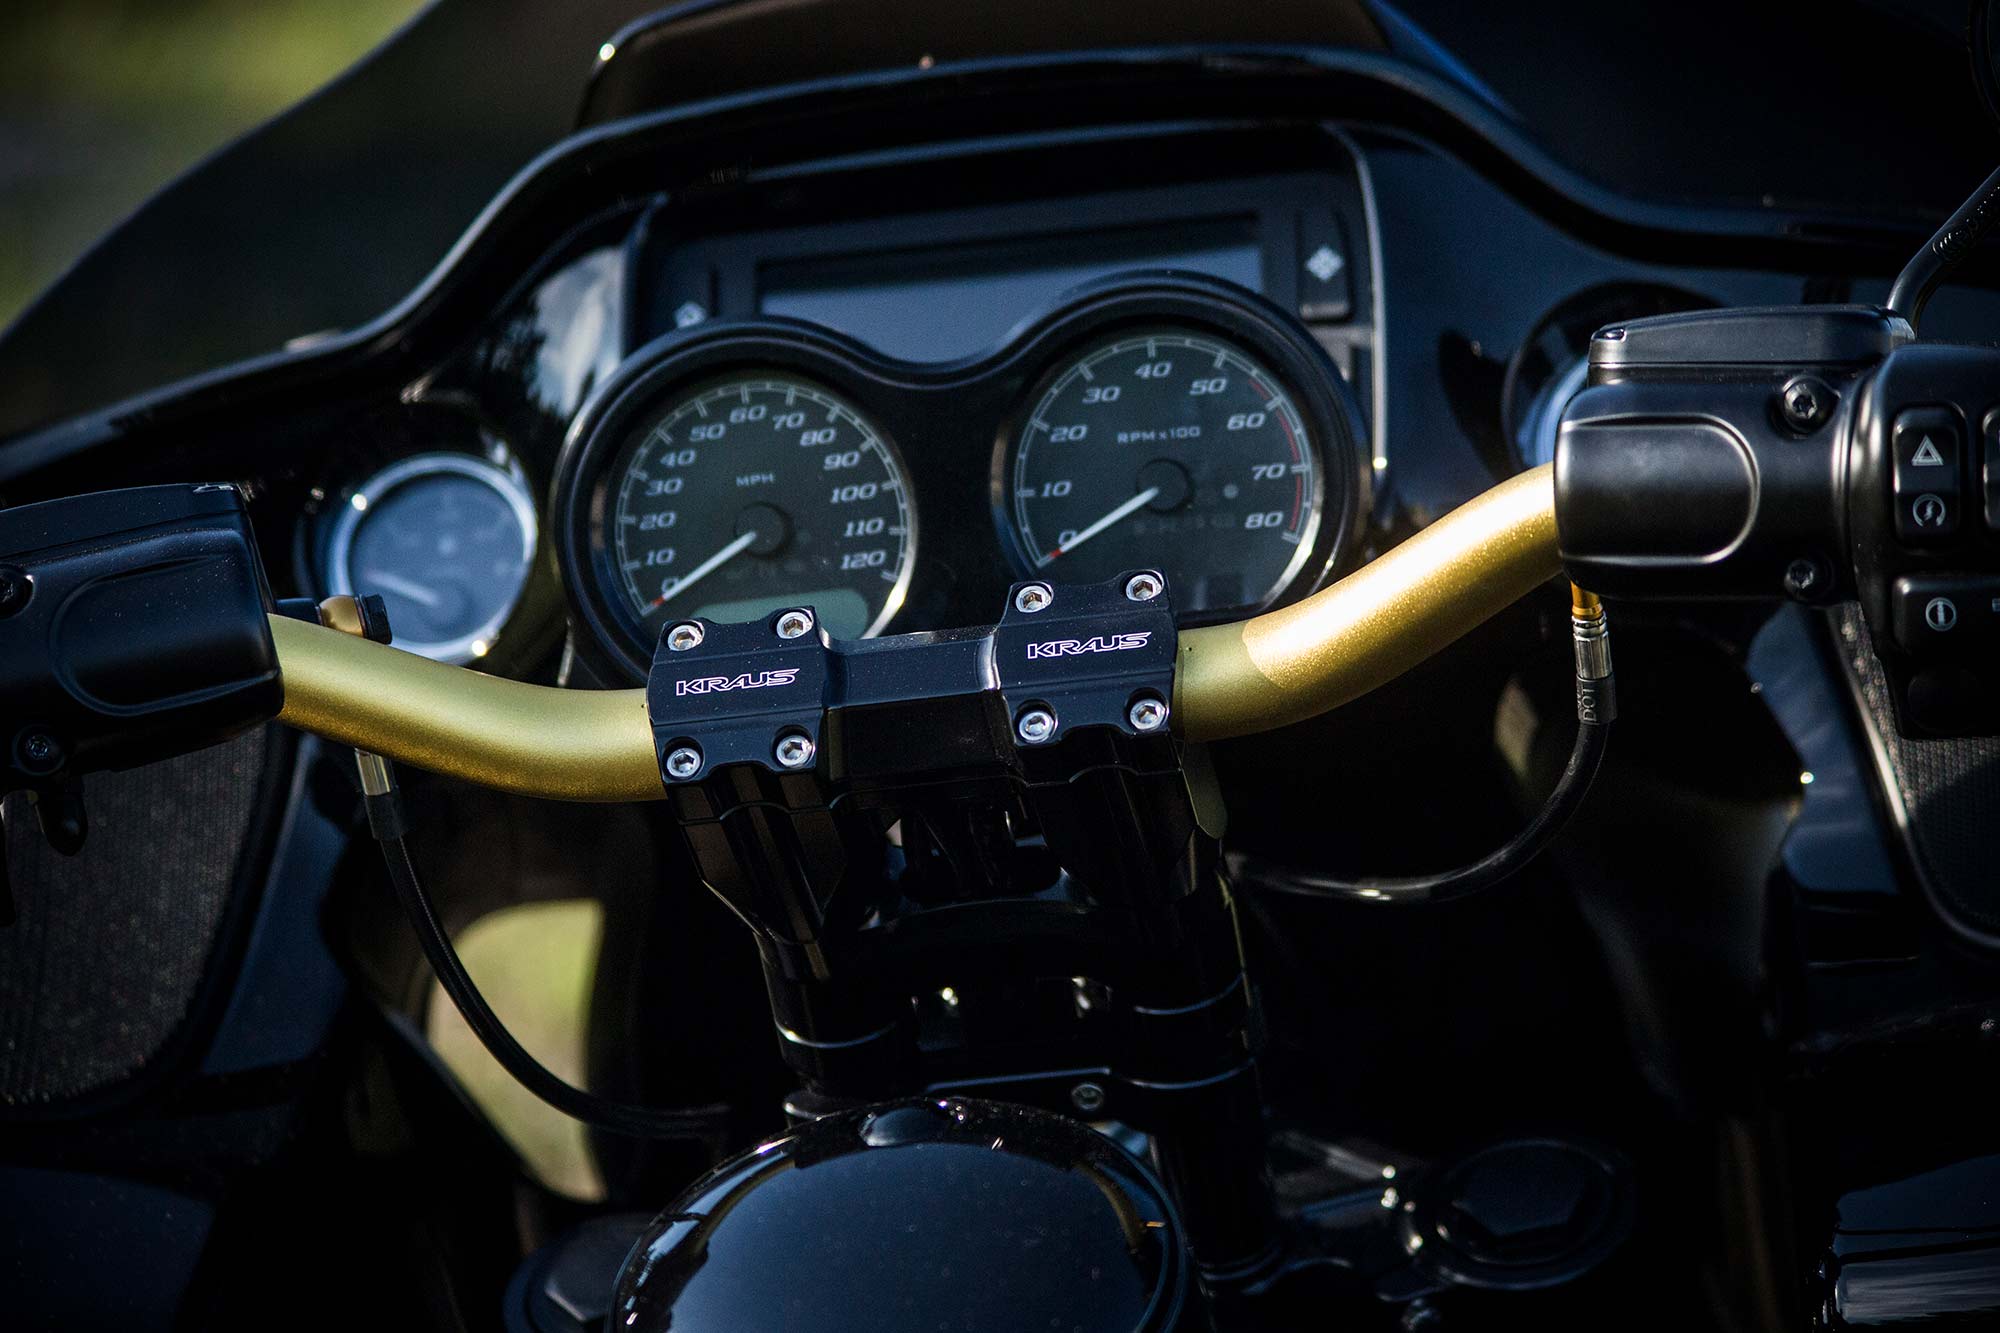 From behind the bars of the custom Harley-Davidson Road Glide.